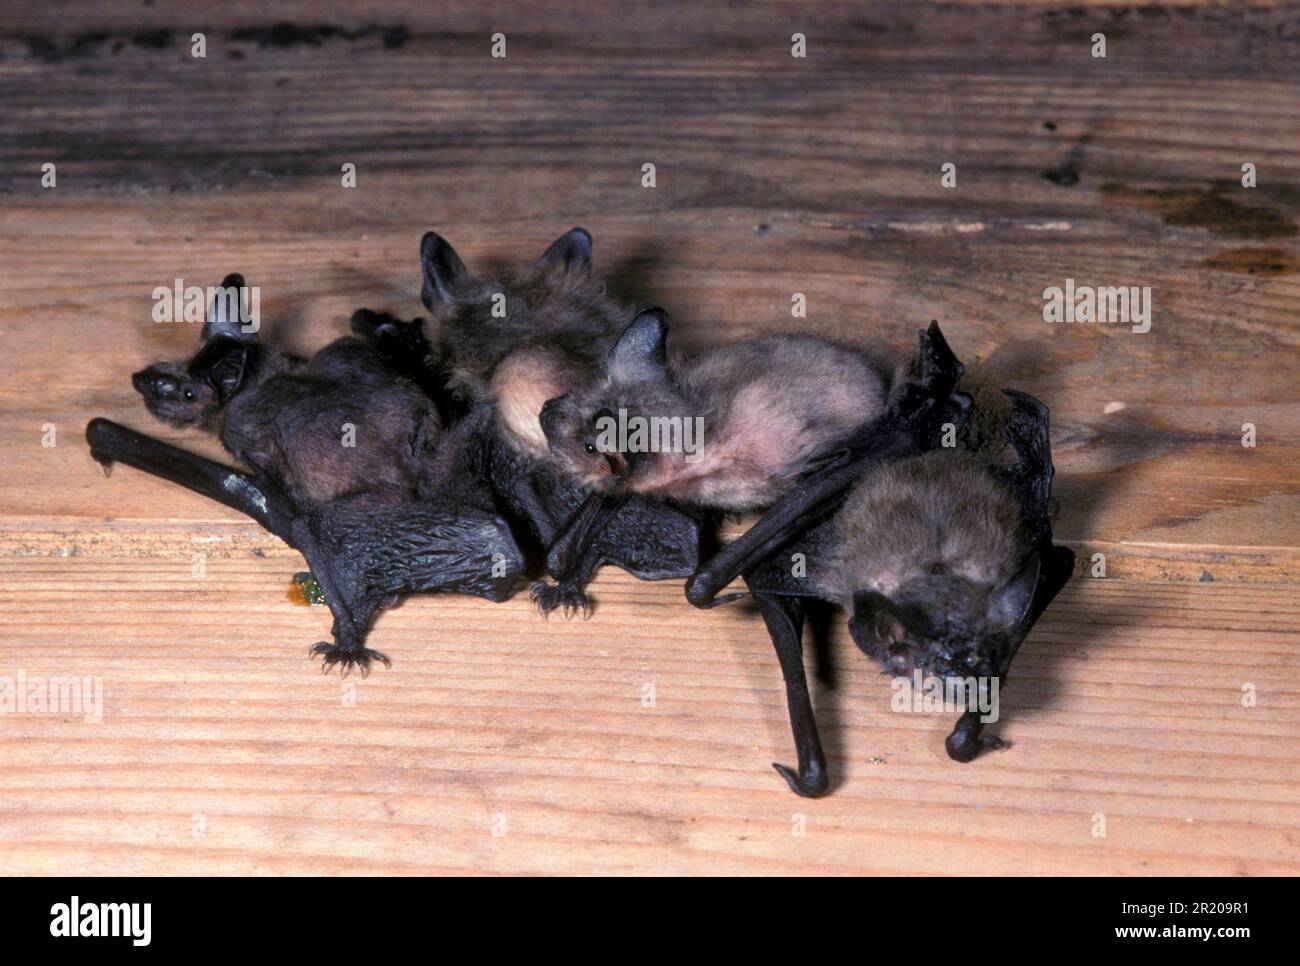 Pipistrelle Bat (P. pipistrellus) Close-up of young in maternity roost (S), Mammals, Animals, Pipistrelle Bat (P. pipistrellus) Stock Photo